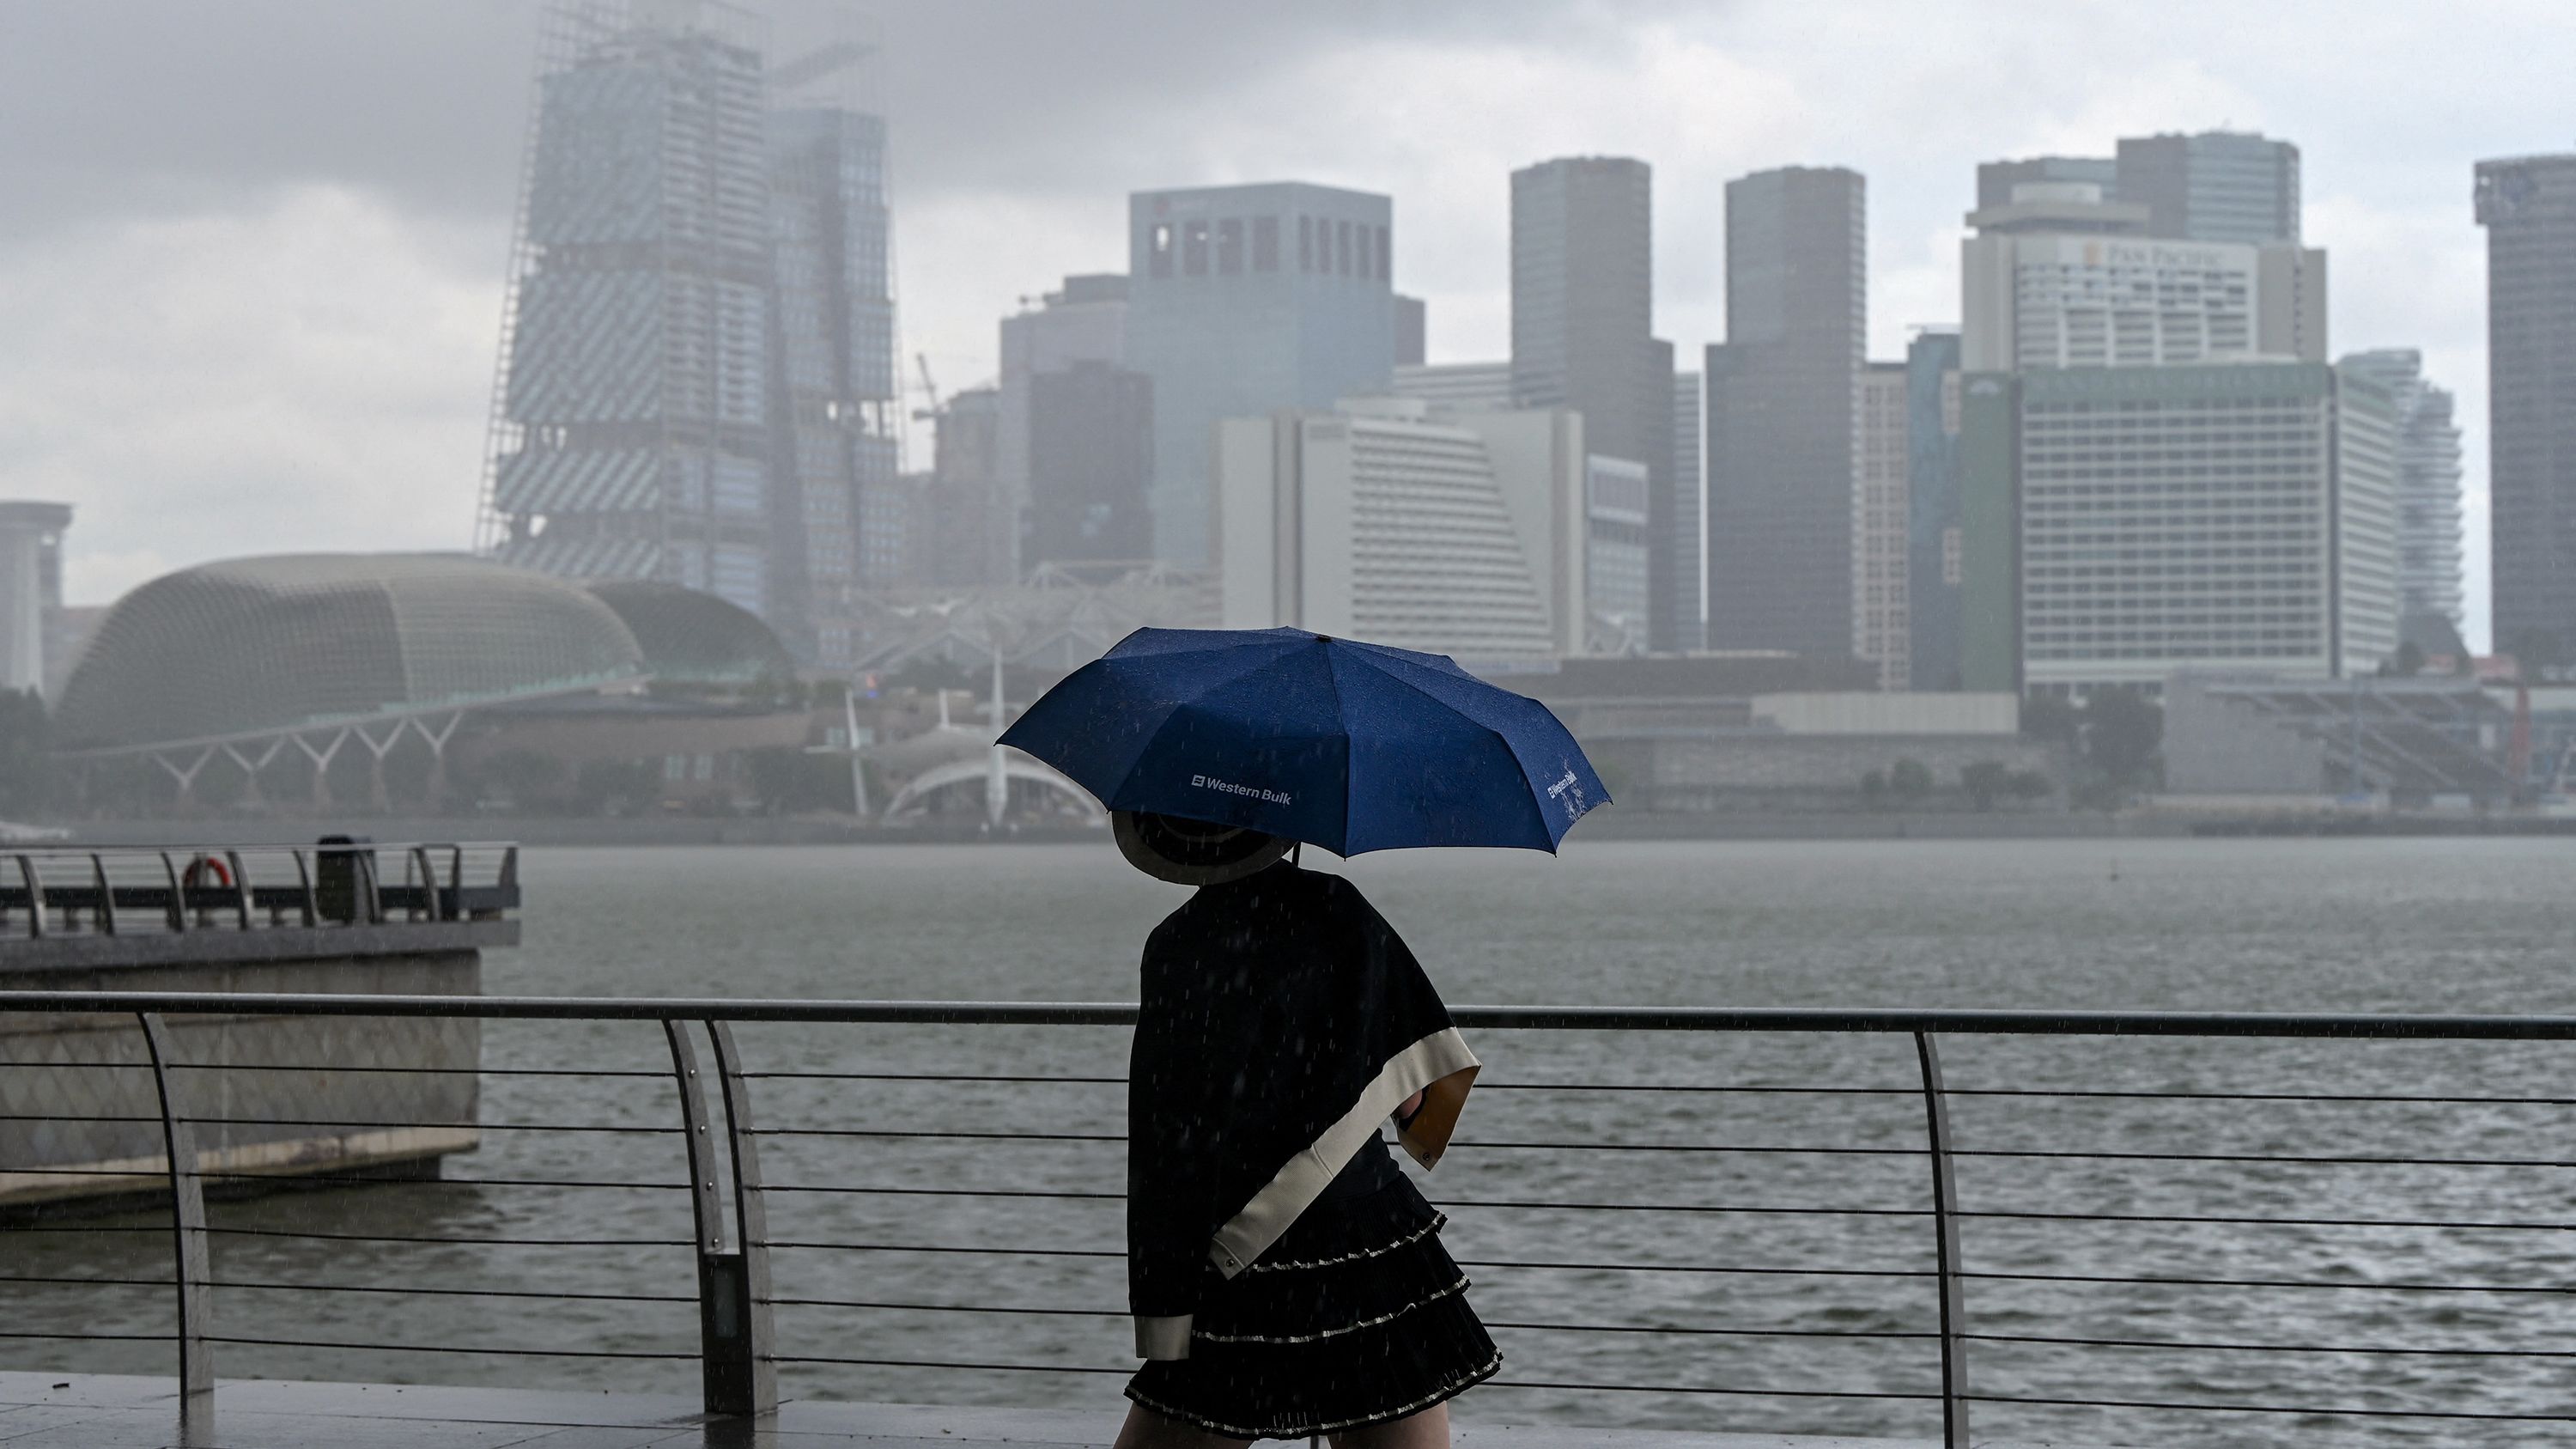 A rainy day in Singapore.